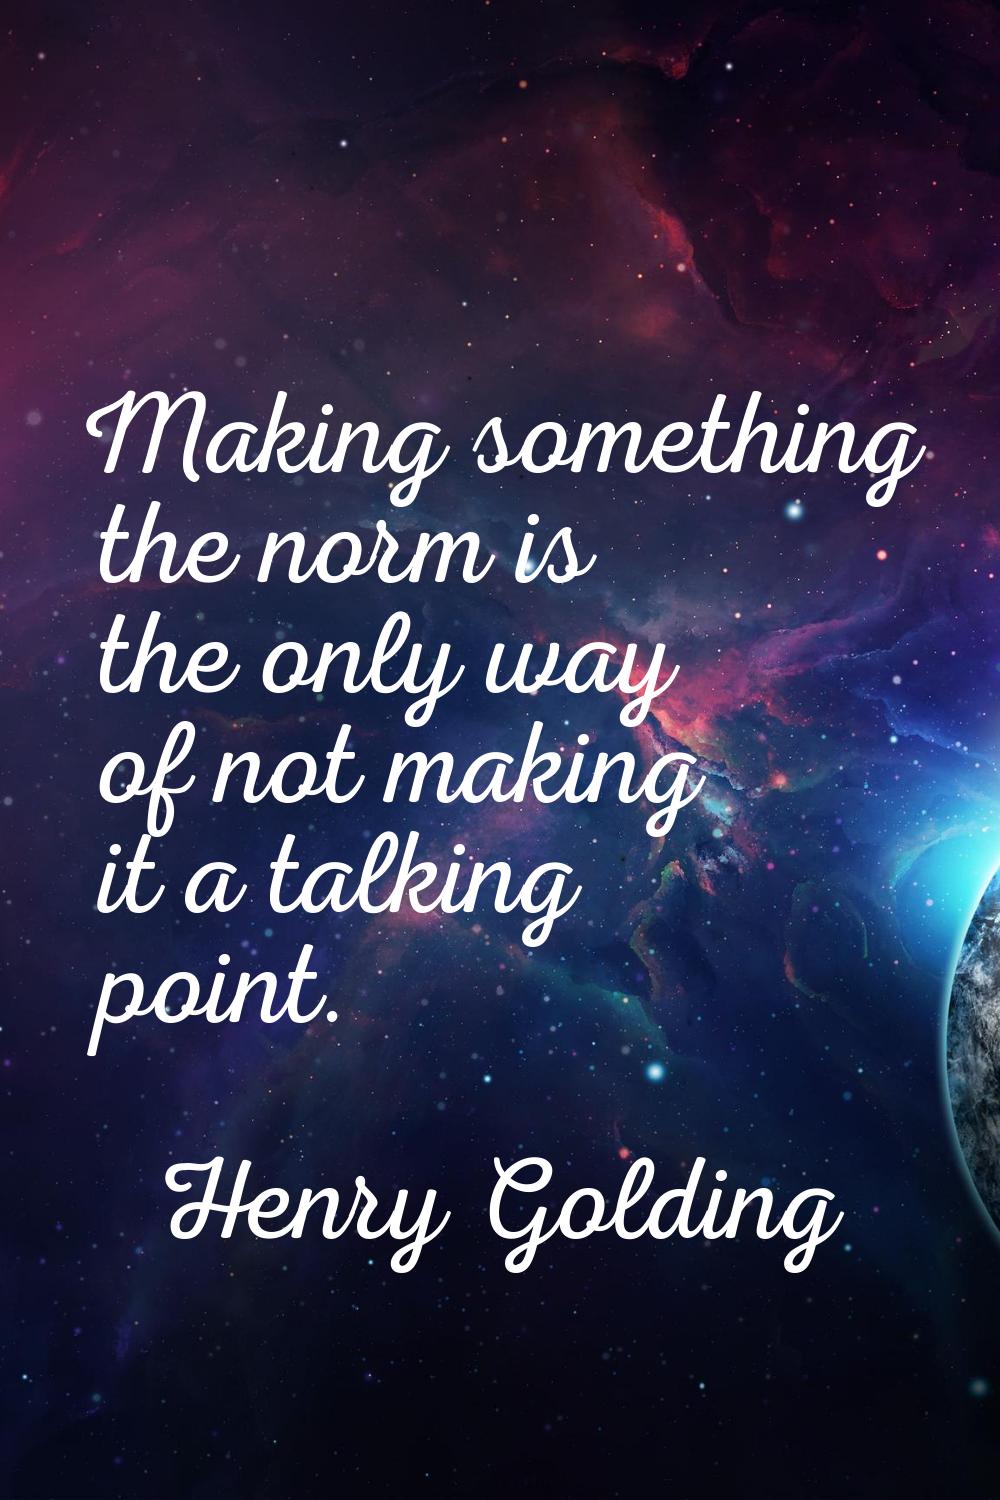 Making something the norm is the only way of not making it a talking point.